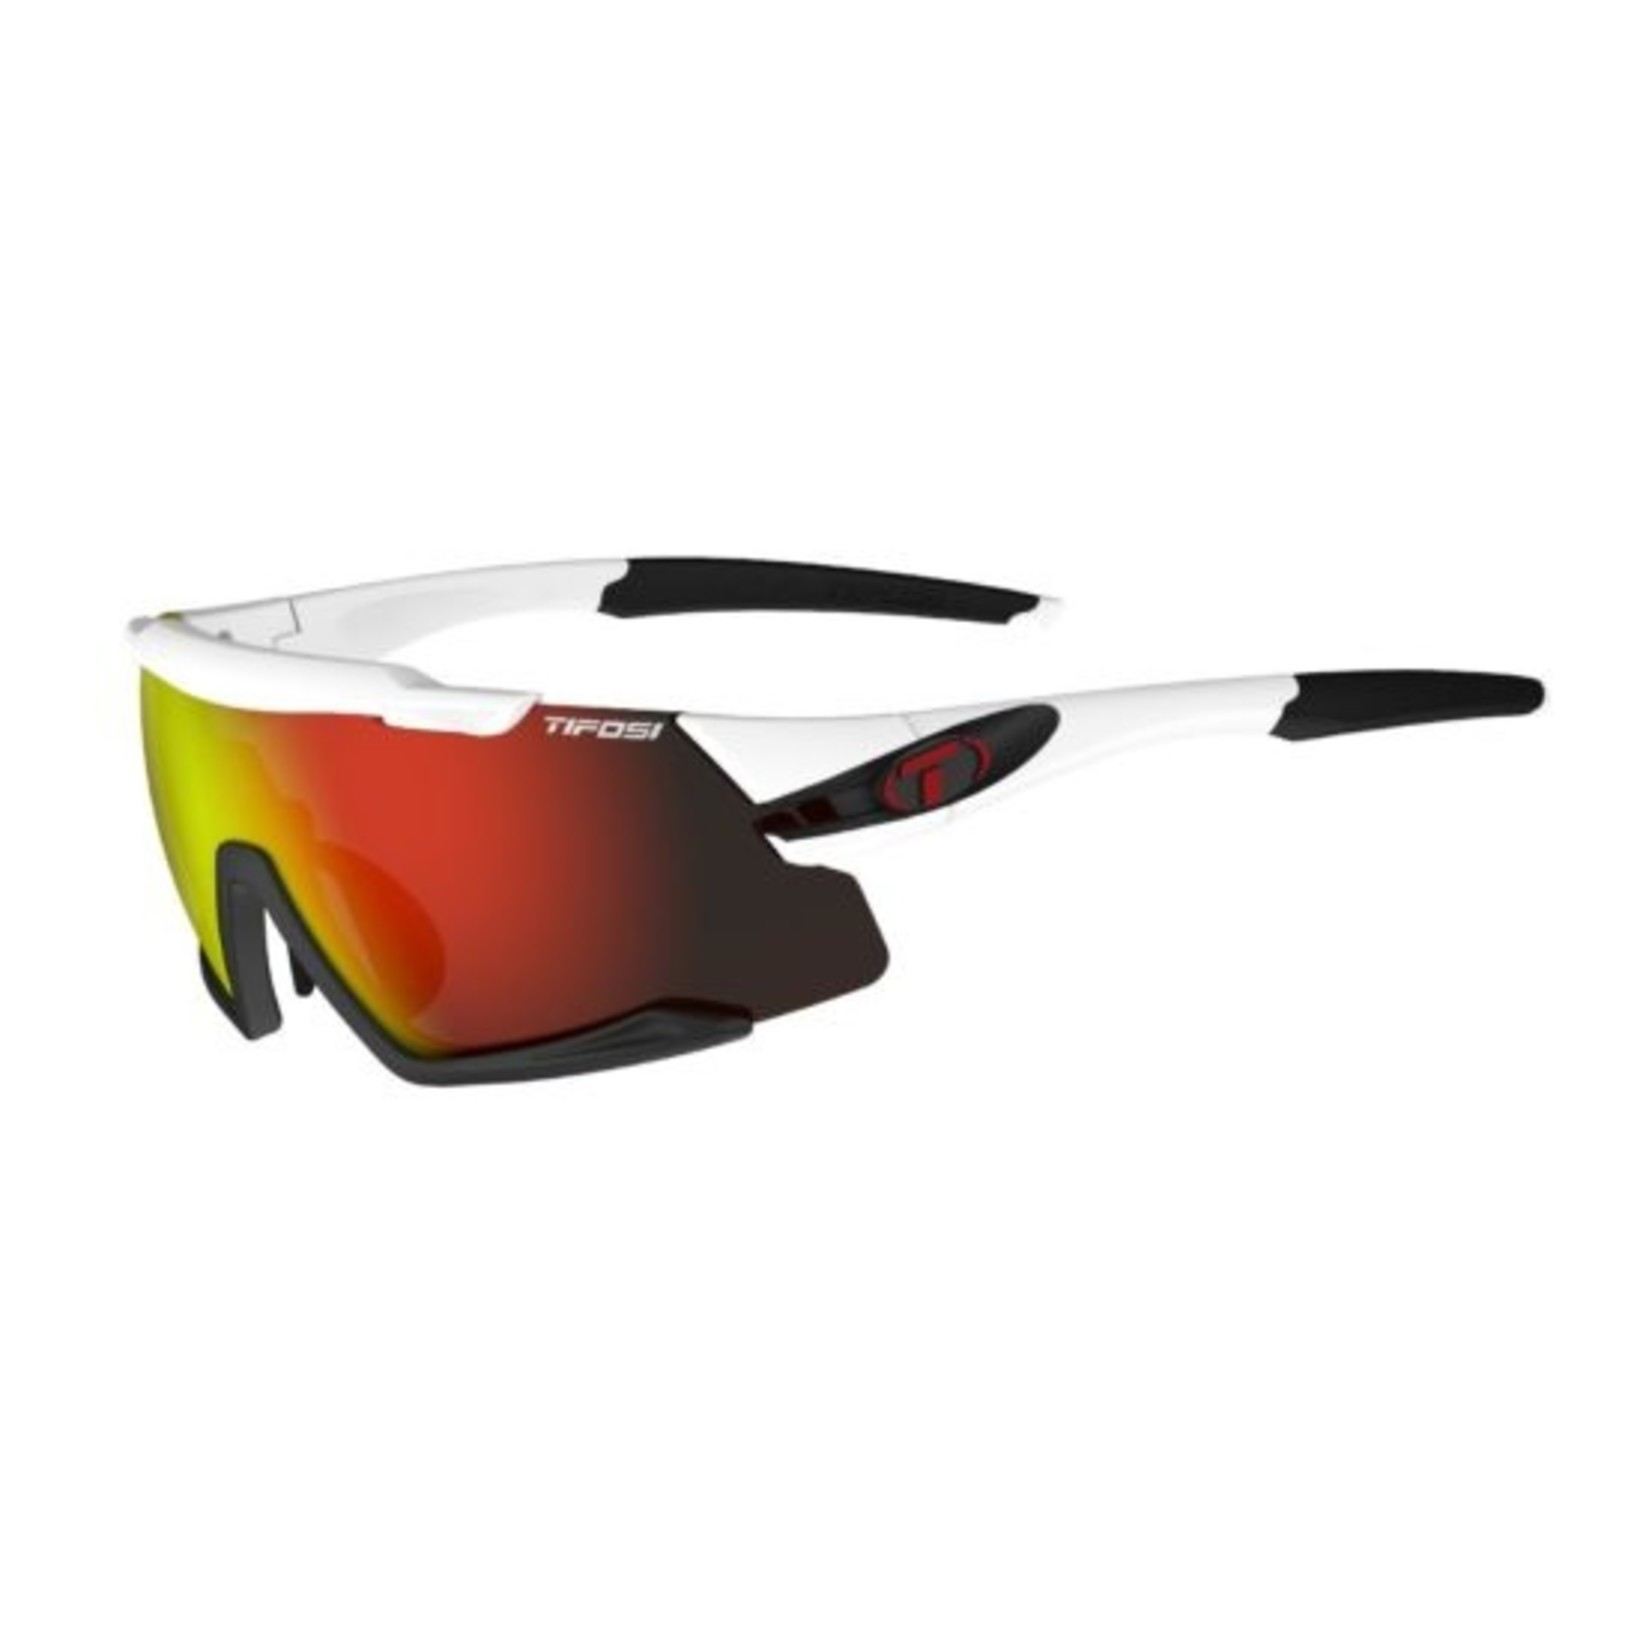 Tifosi Optics Tifosi Aethon, White/Black  Interchangeable Sunglasses - Clarion Red/AC Red/Clear